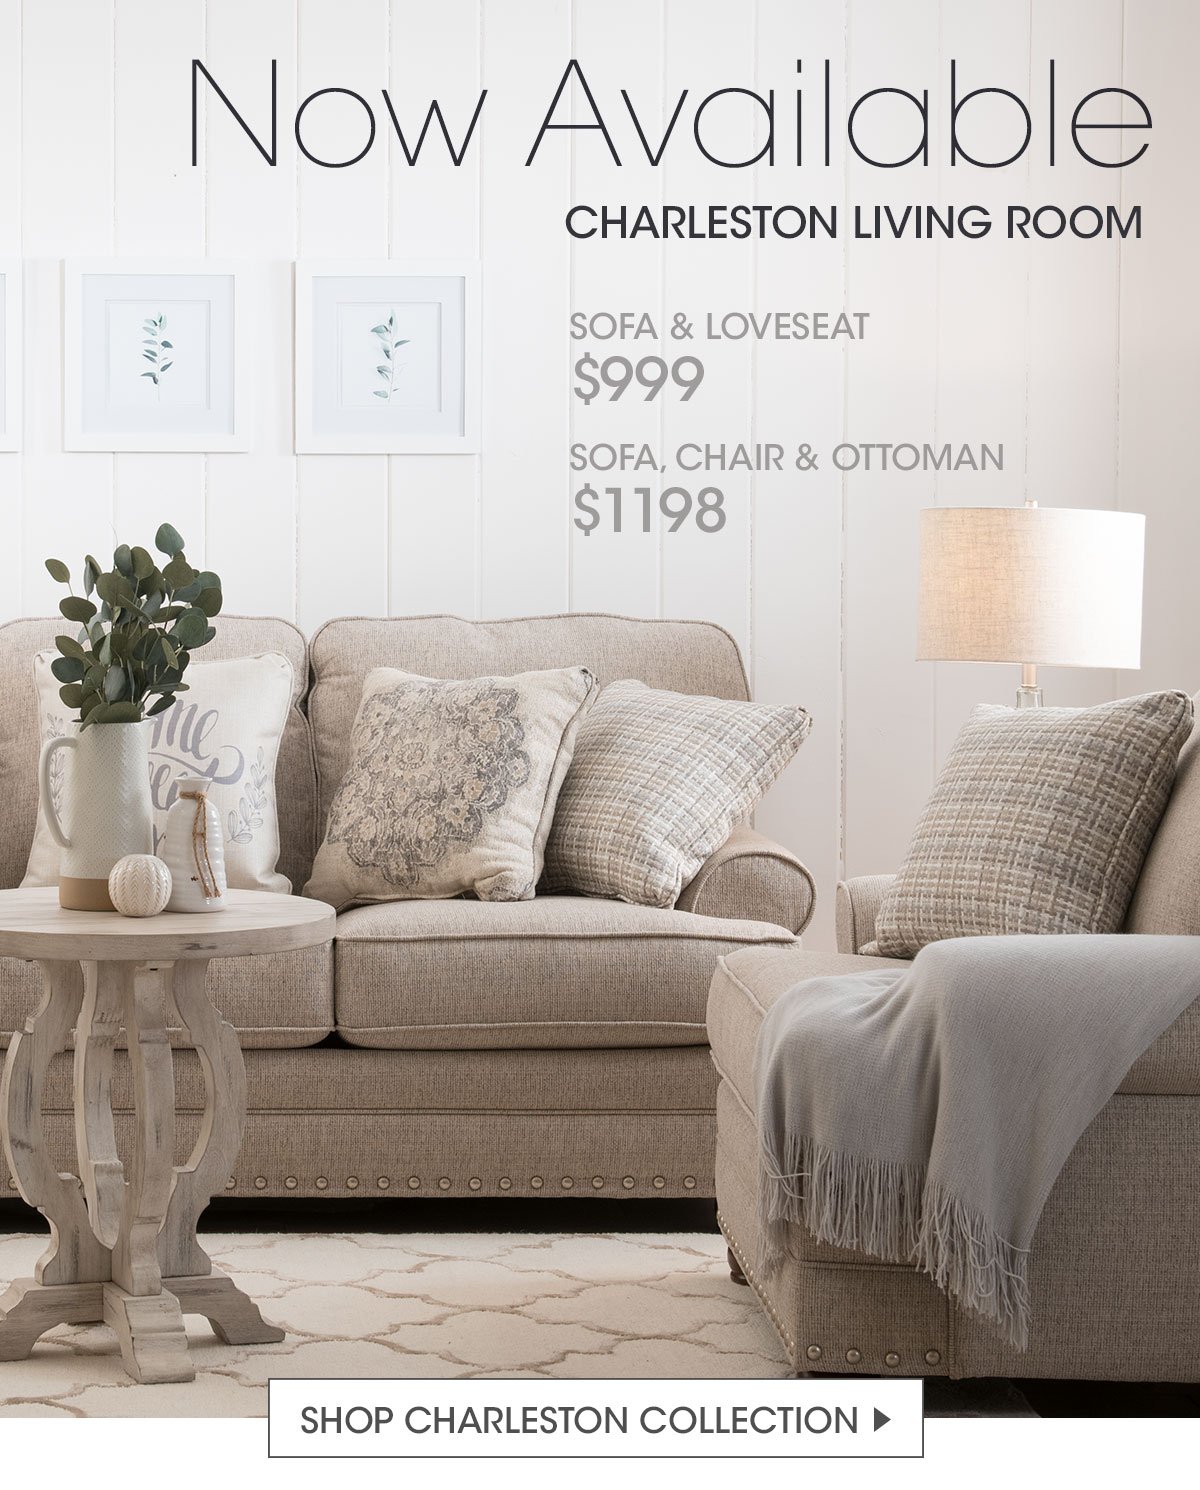 Bobs Discount Furniture My Charleston Living Room Collection Is Now Available Milled